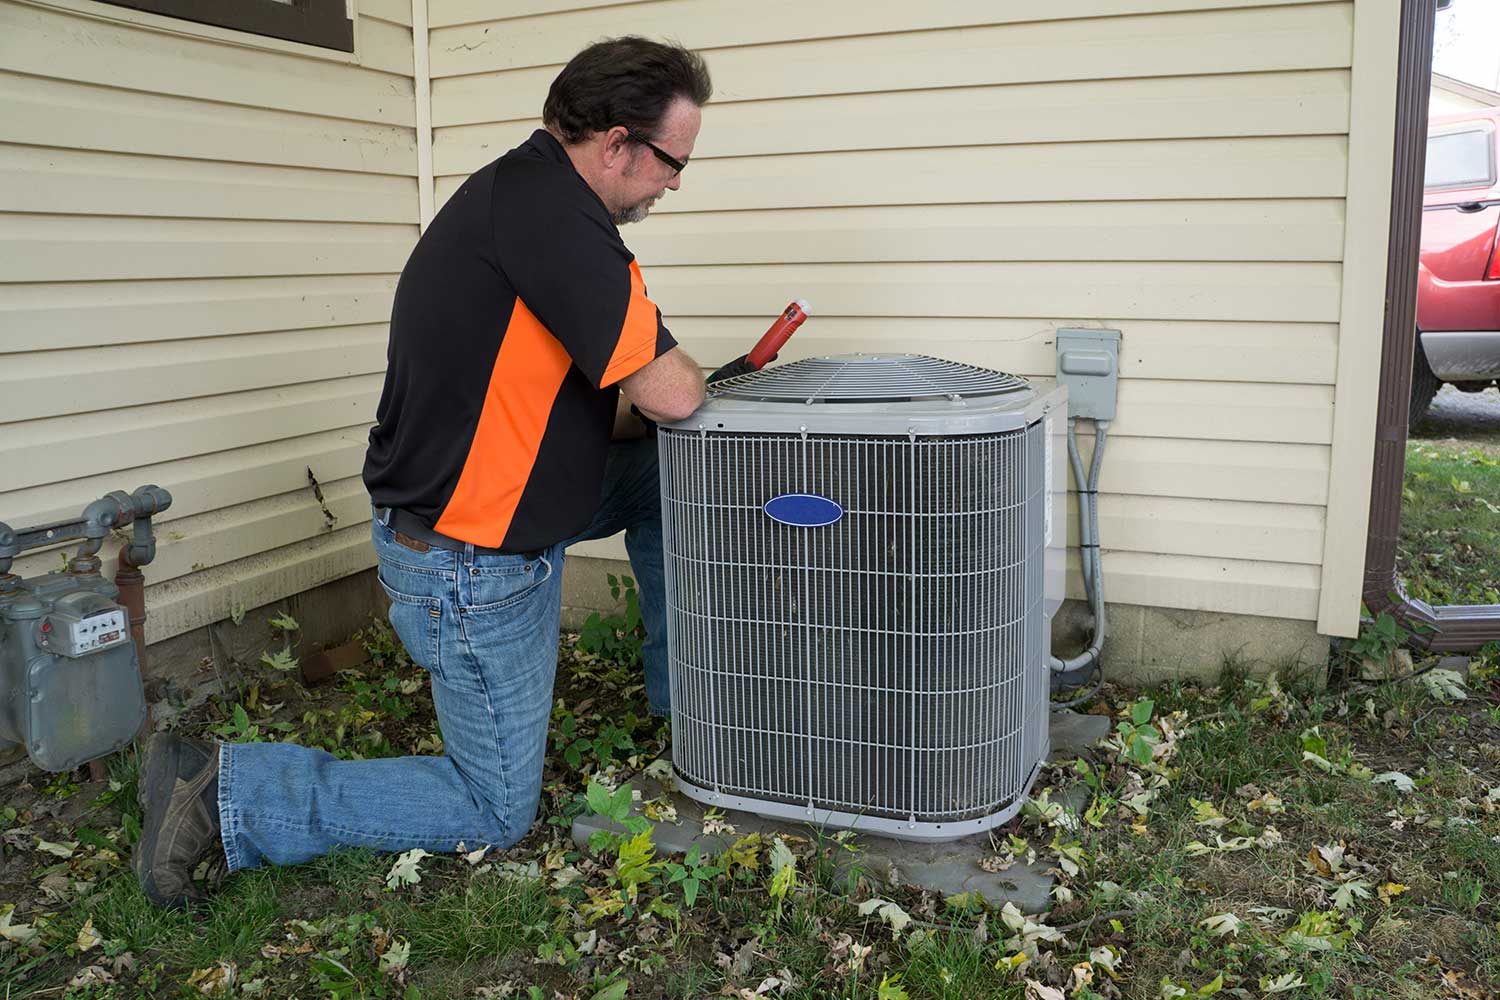 Getting proactive for summer time Heating and Air Conditioning savings